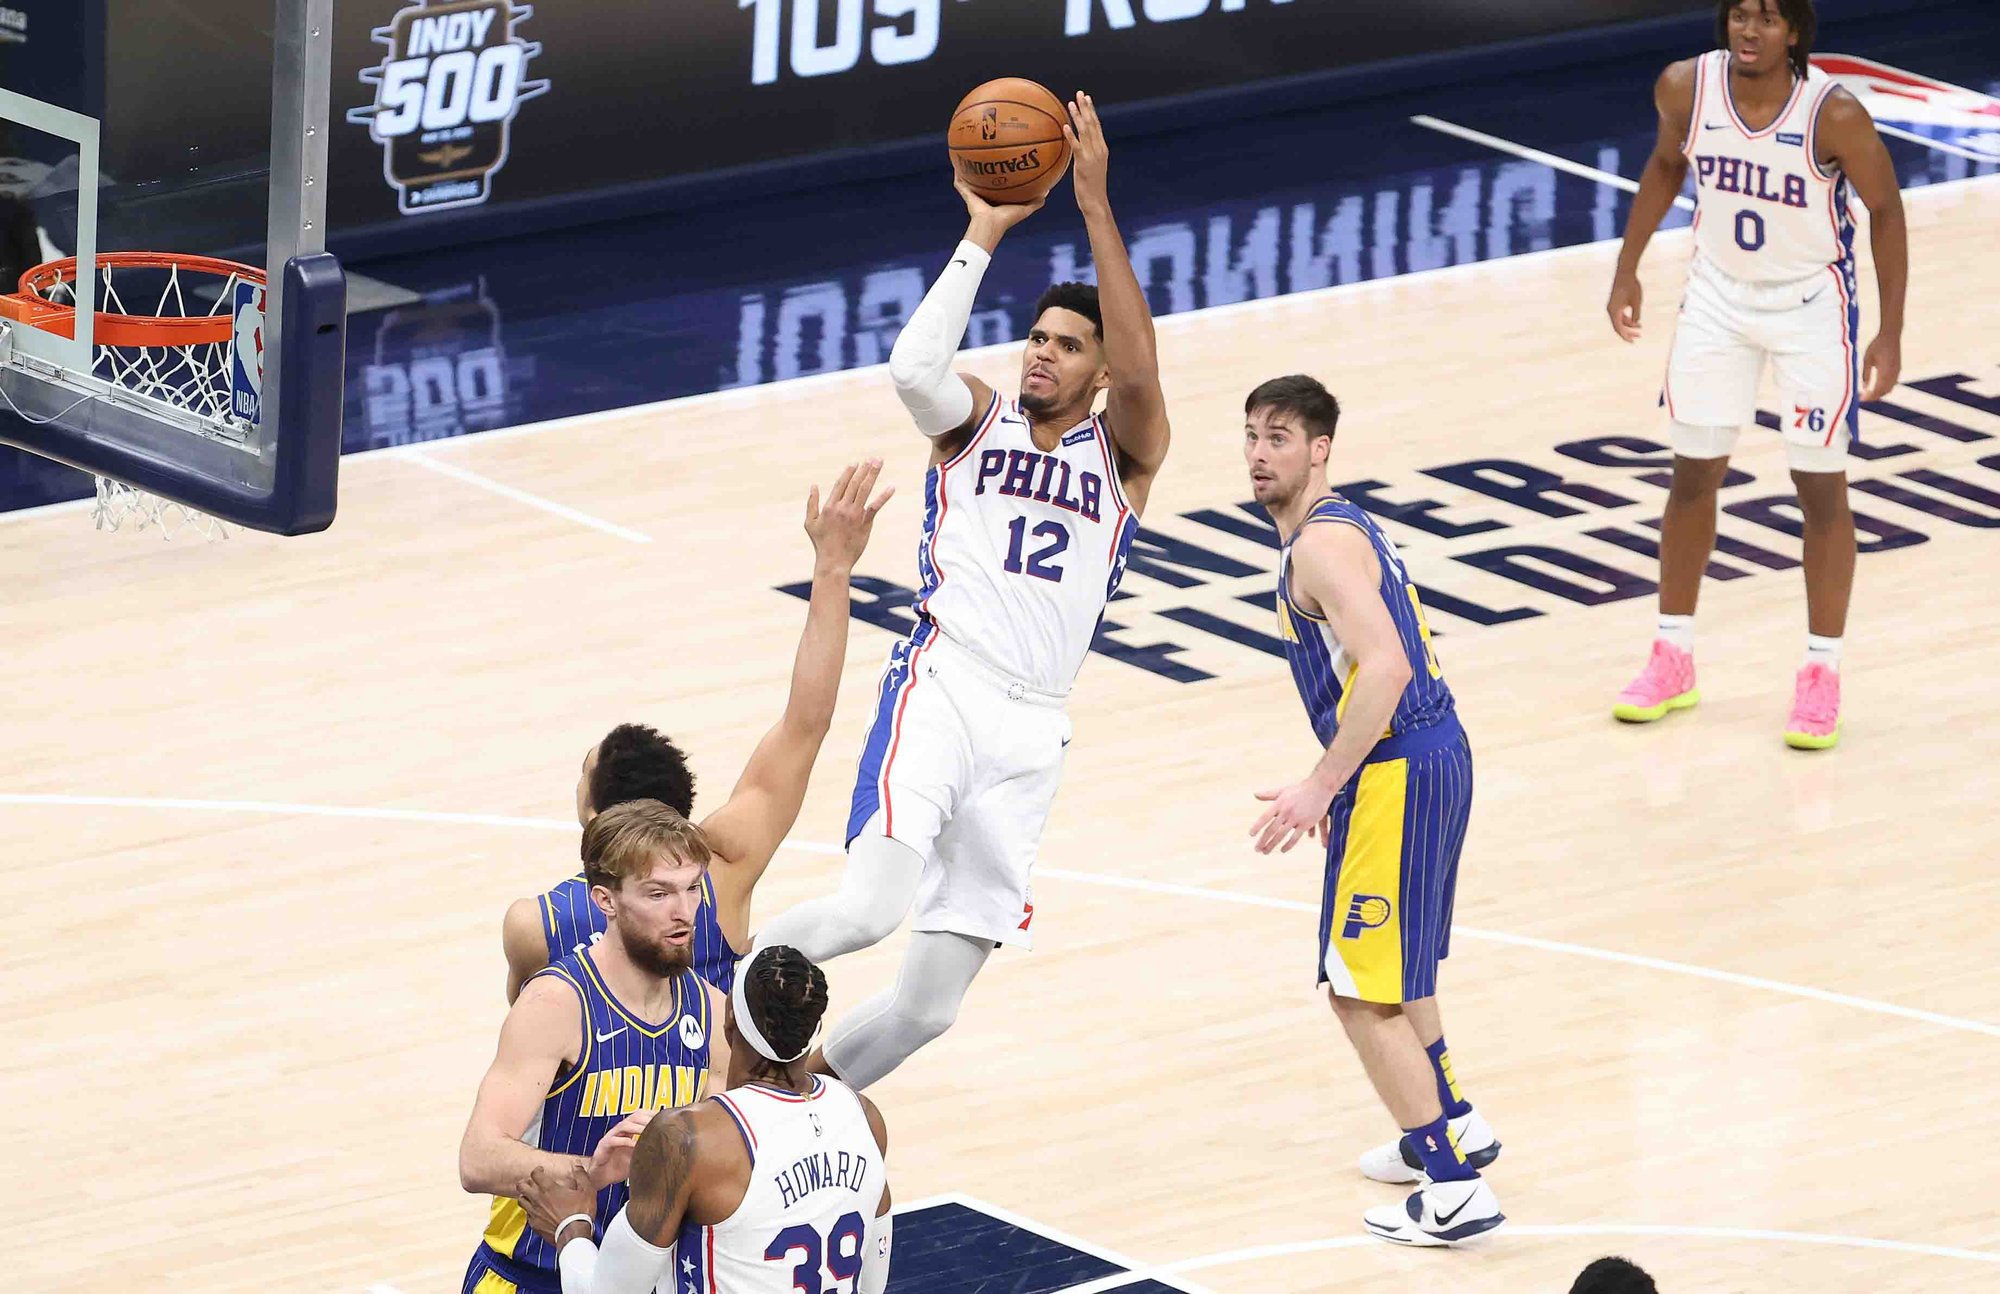 INDIANAPOLIS, INDIANA - JANUARY 31: Tobias Harris #12 of the Philadelphia 76ers shoots the ball in the game against the Indiana Pacers at Bankers Life Fieldhouse on January 31, 2021 in Indianapolis, Indiana. NOTE TO USER: User expressly acknowledges and agrees that, by downloading and or using this photograph, User is consenting to the terms and conditions of the Getty Images License Agreement. (Photo by Andy Lyons/Getty Images)